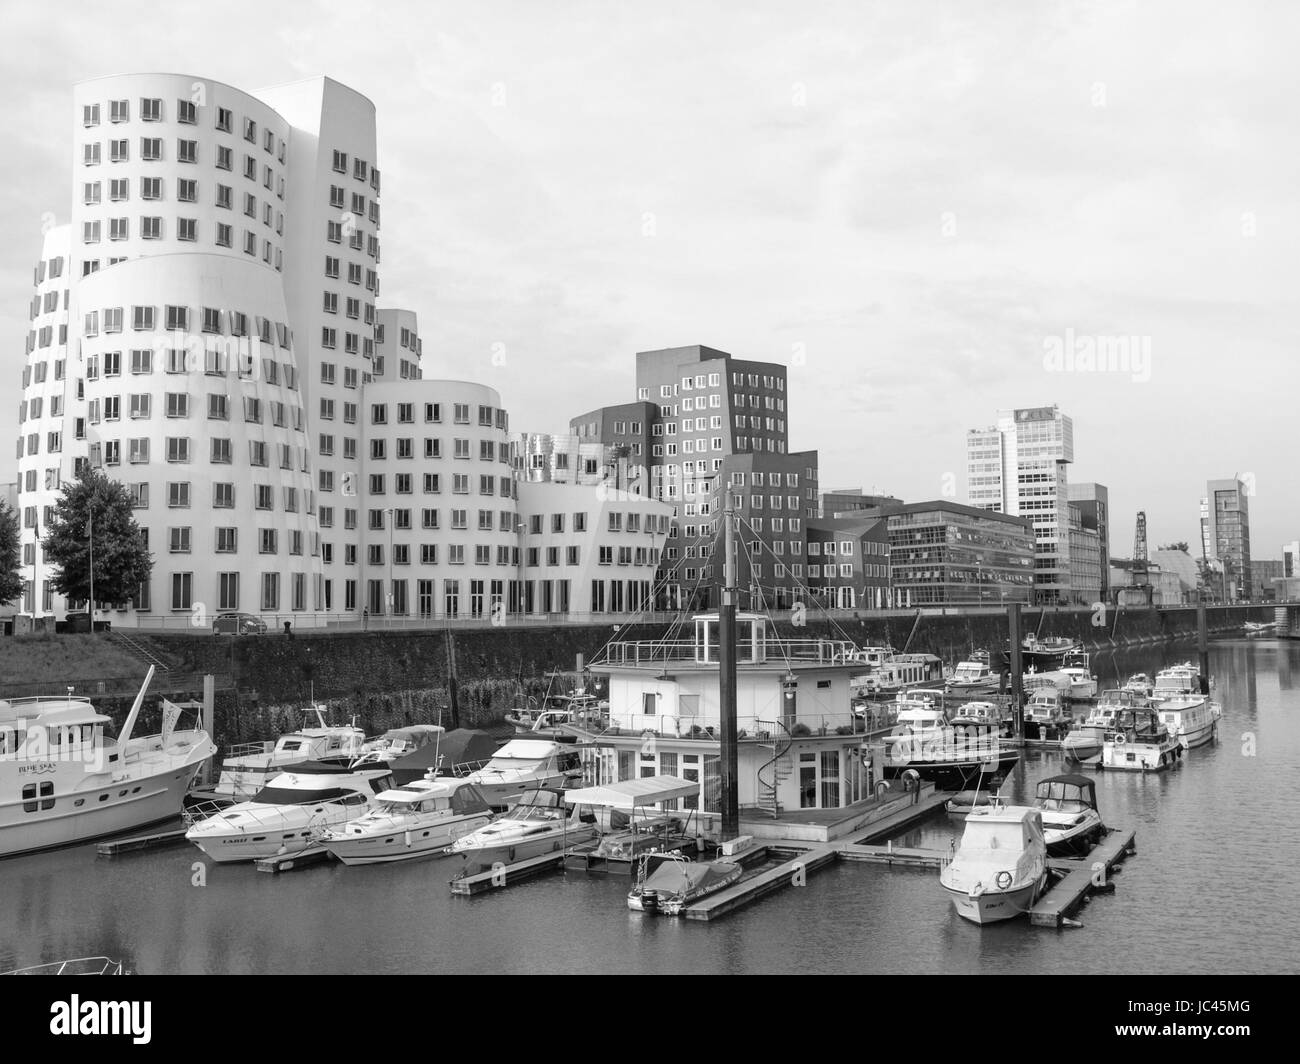 DUESSELDORF, GERMANY - AUGUST 3, 2009: The new Medienafen is a redevelopment area in the former docklands and harbour with buildings designed by Steven Holl, David Chipperfield and Frank O Gehry Stock Photo